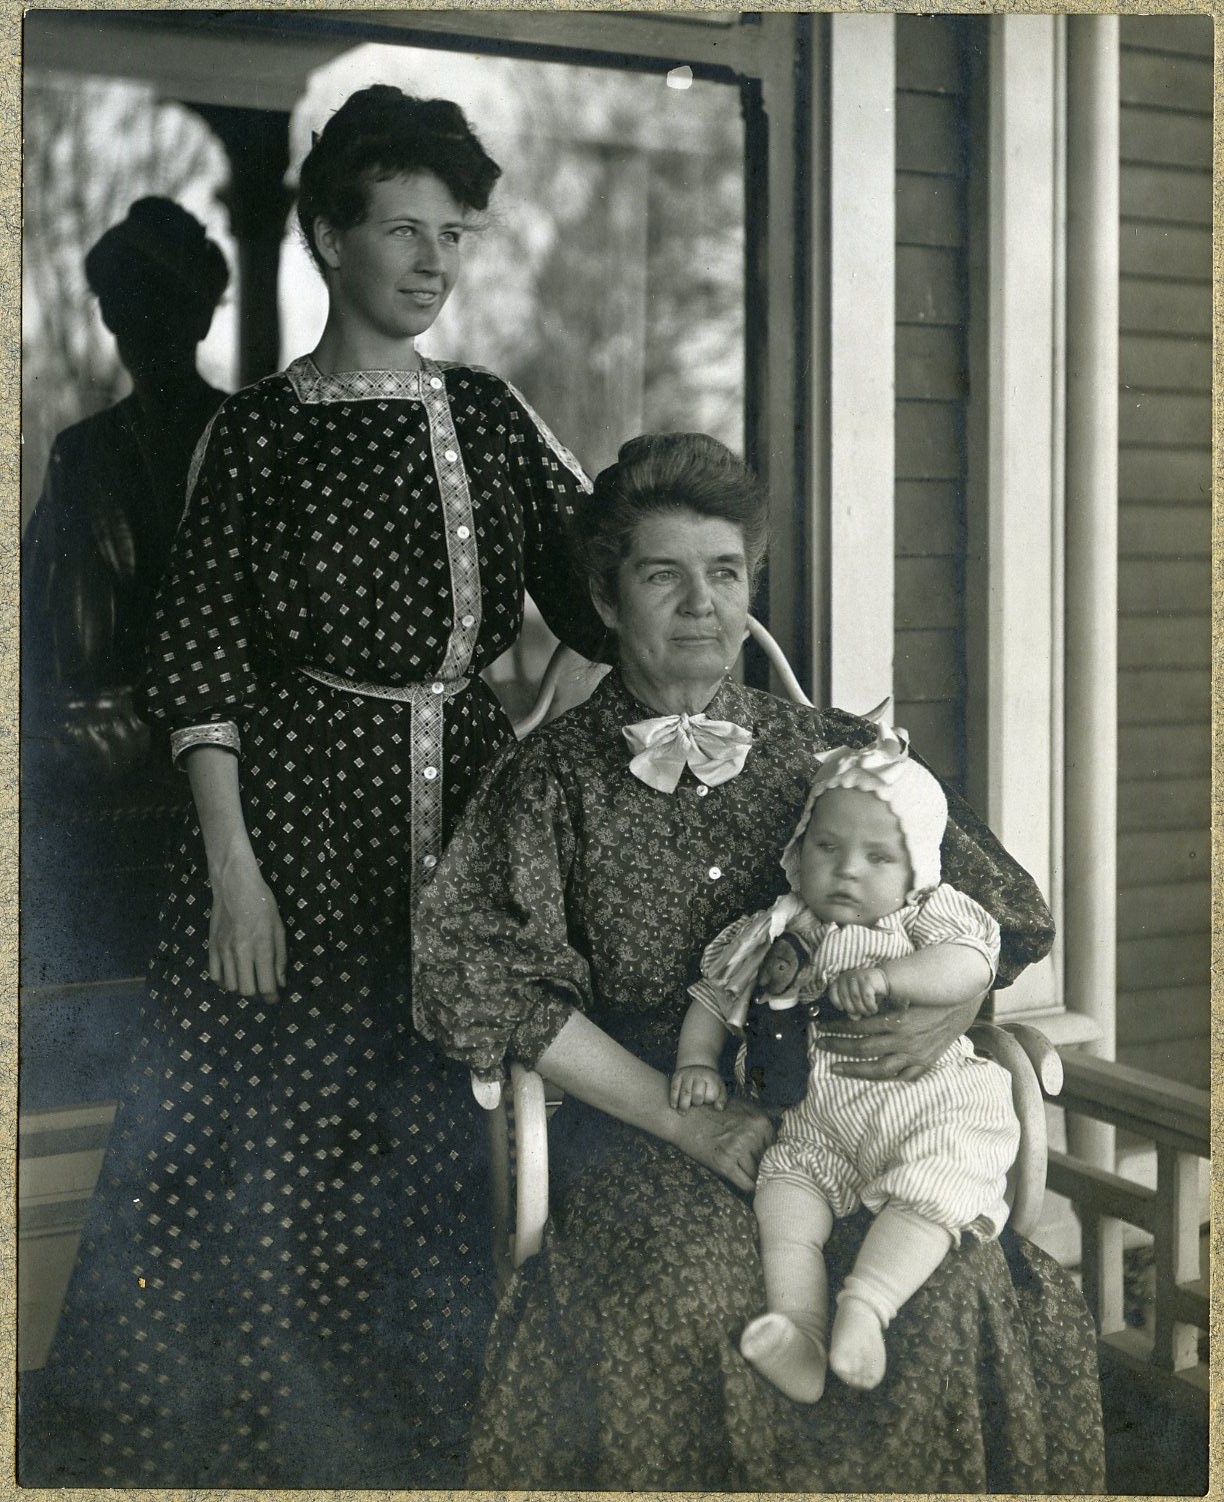 Mrs. Ragan, daughter-in-law, and baby. Courtesy of Adams County Historical Society.